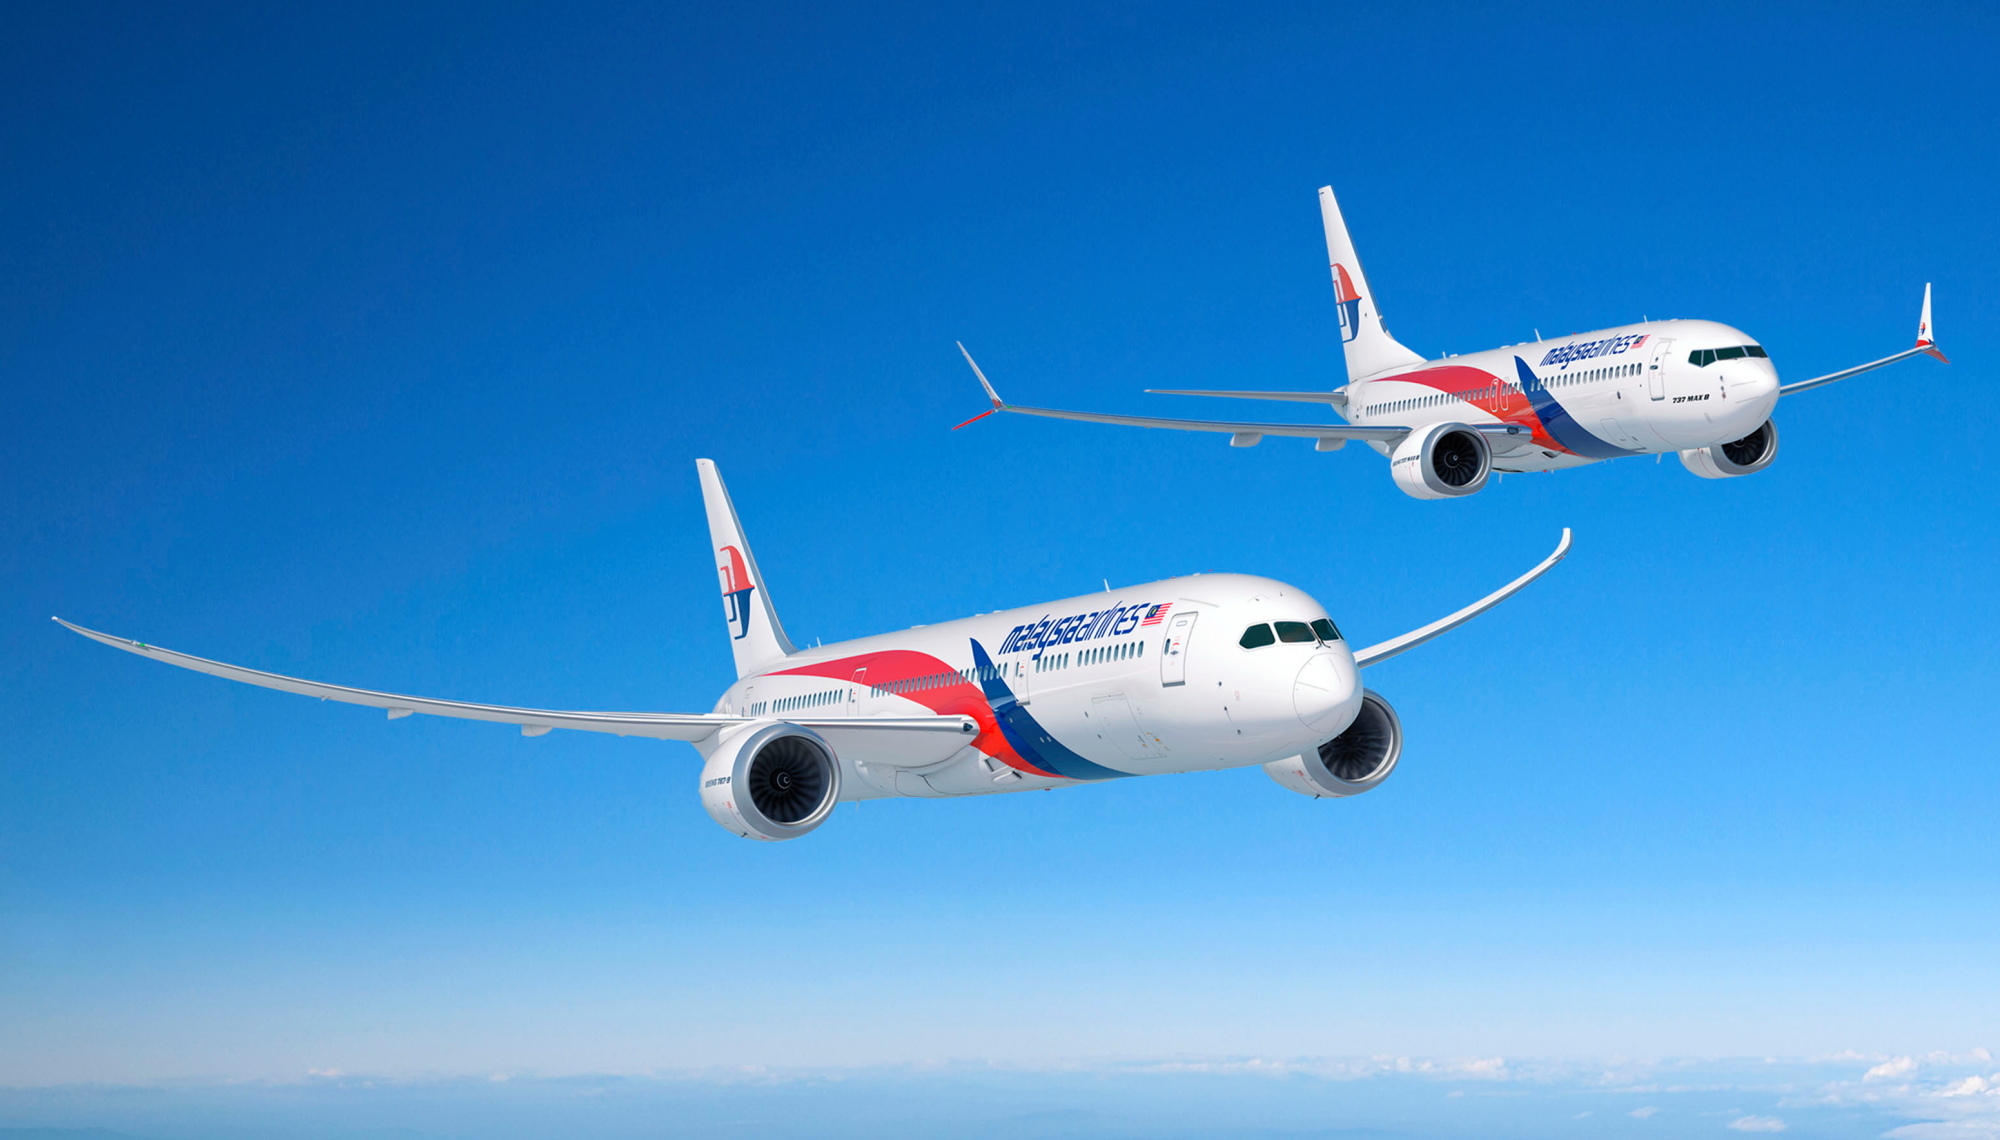 Malaysia Airlines has signed a Memorandum of Understanding with Boeing for 16 airplanes. The MOU converts eight of Malaysia Airlines' existing order for Boeing 737 MAX aircraft into eight B787-9 Dreamliners, and includes eight additional purchase rights for B737 MAX 8s. Click to enlarge.